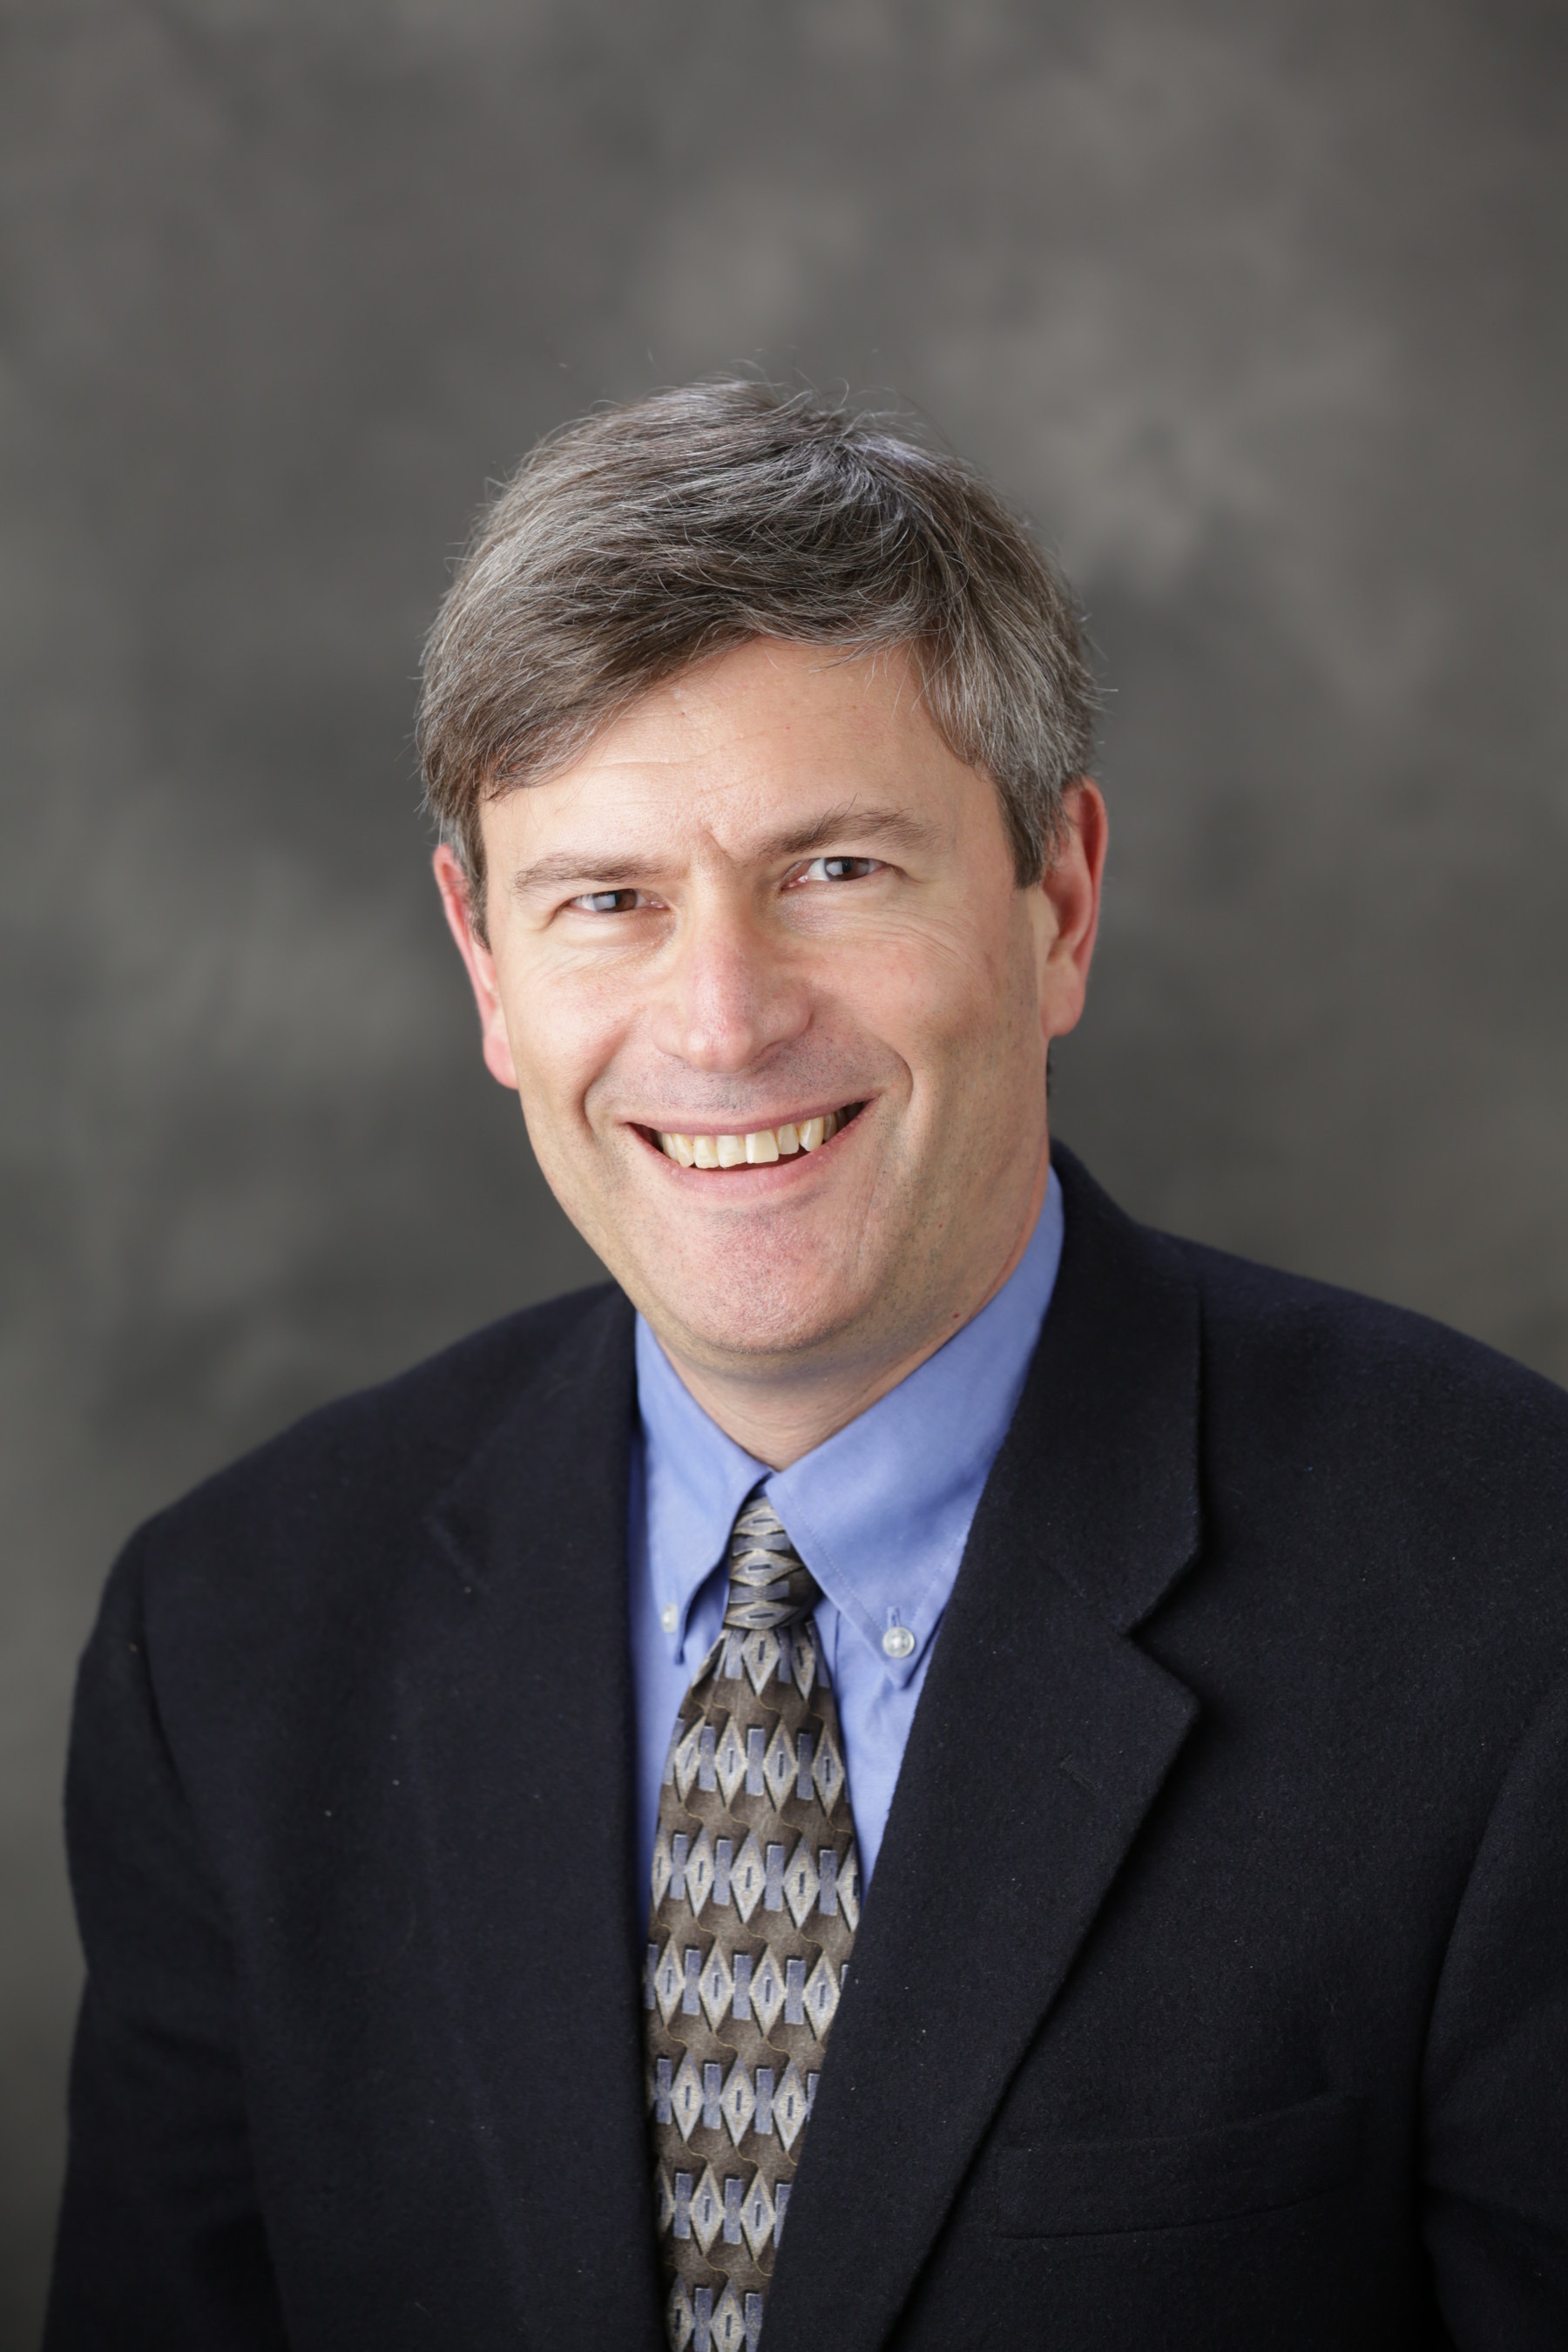 Russell Van Gelder, M.D., Ph.D., president of the American Academy of Ophthalmology, 2015